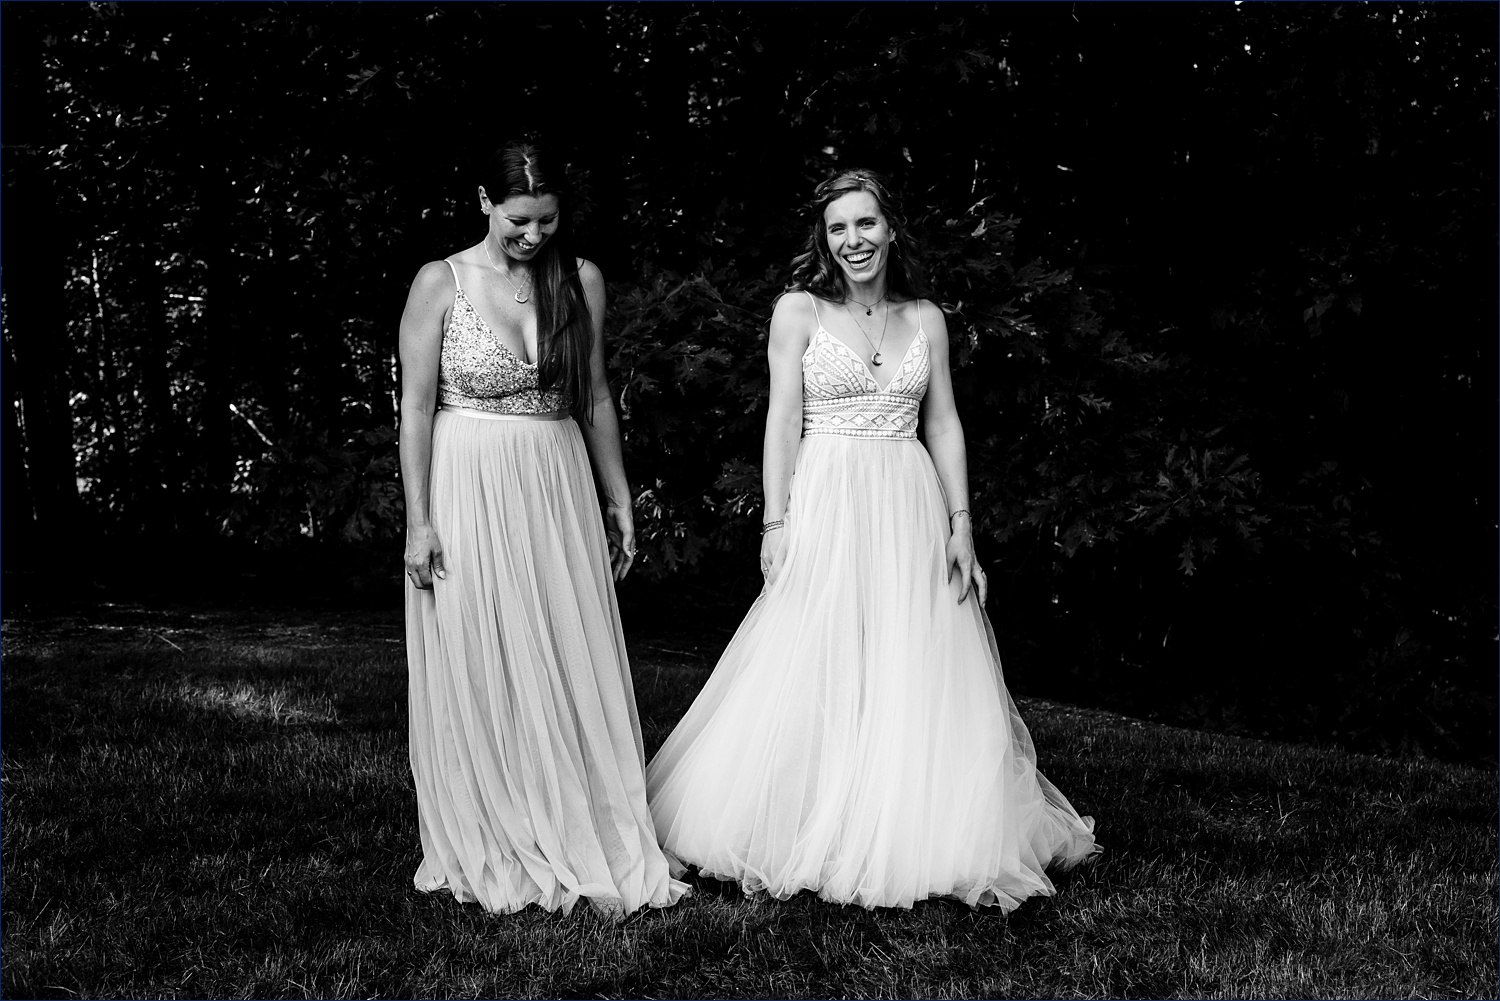 The bride and her sister dance on the intimate wedding day in MA